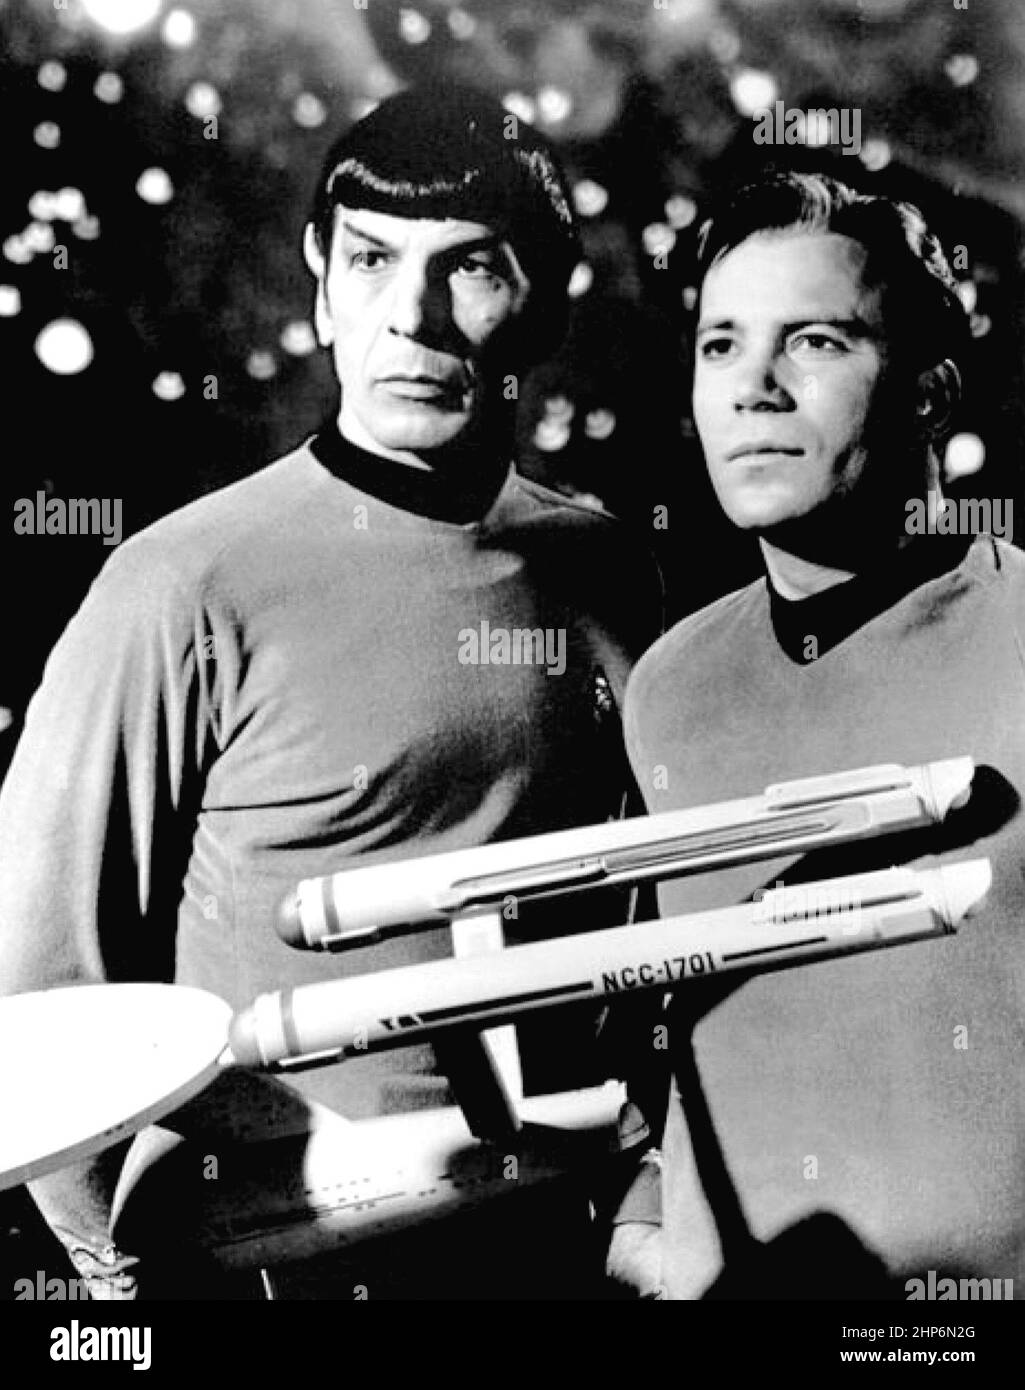 Publicity photo of Leonard Nimoy and William Shatner as Mr. Spock and Captain Kirk from the television program Star Trek ca. 1968 Stock Photo